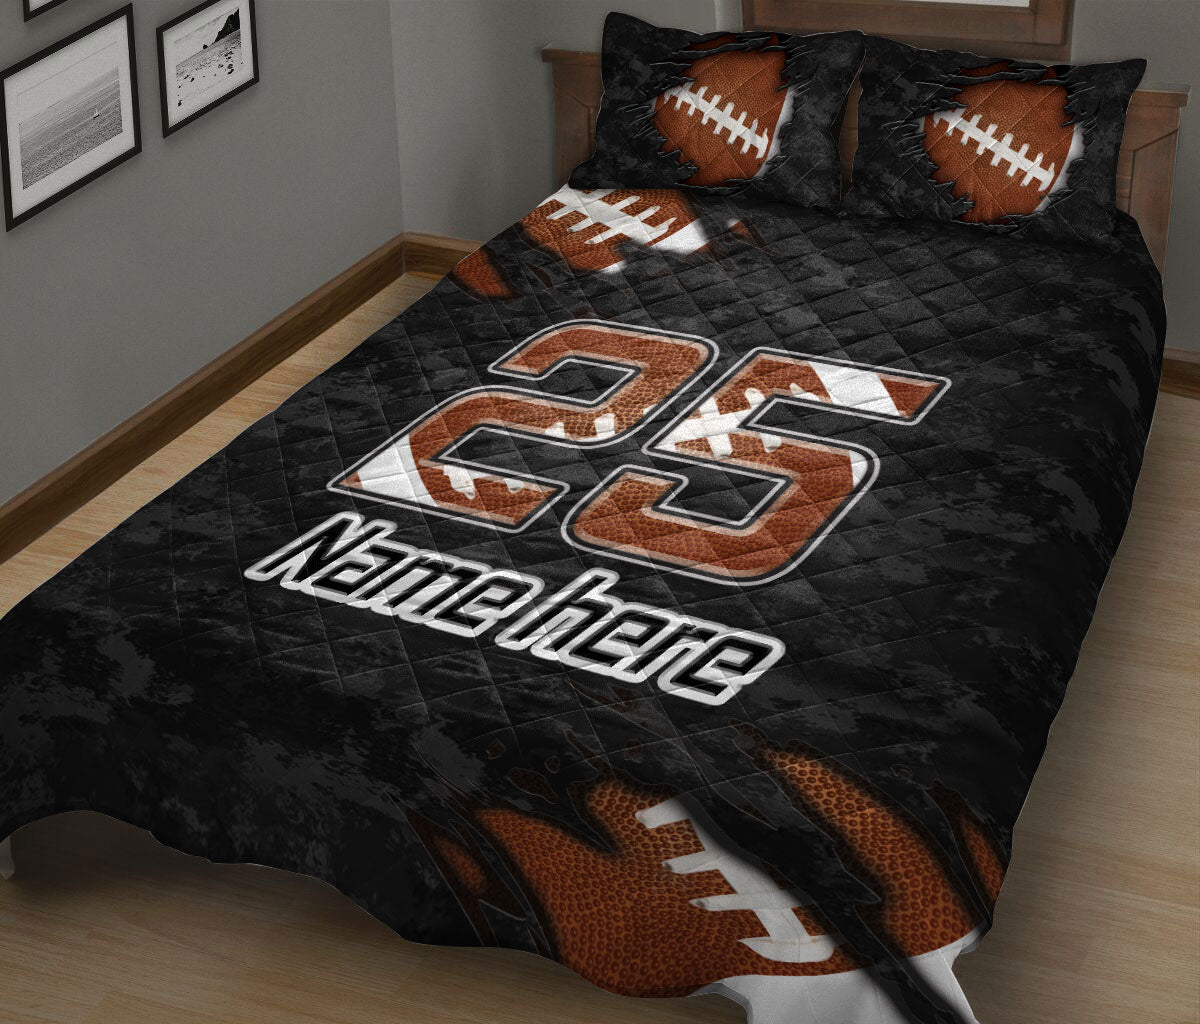 Ohaprints-Quilt-Bed-Set-Pillowcase-Football-Sport-Brown-Ball-Pattern-Black-Camo-Custom-Personalized-Name-Number-Blanket-Bedspread-Bedding-1499-King (90'' x 100'')